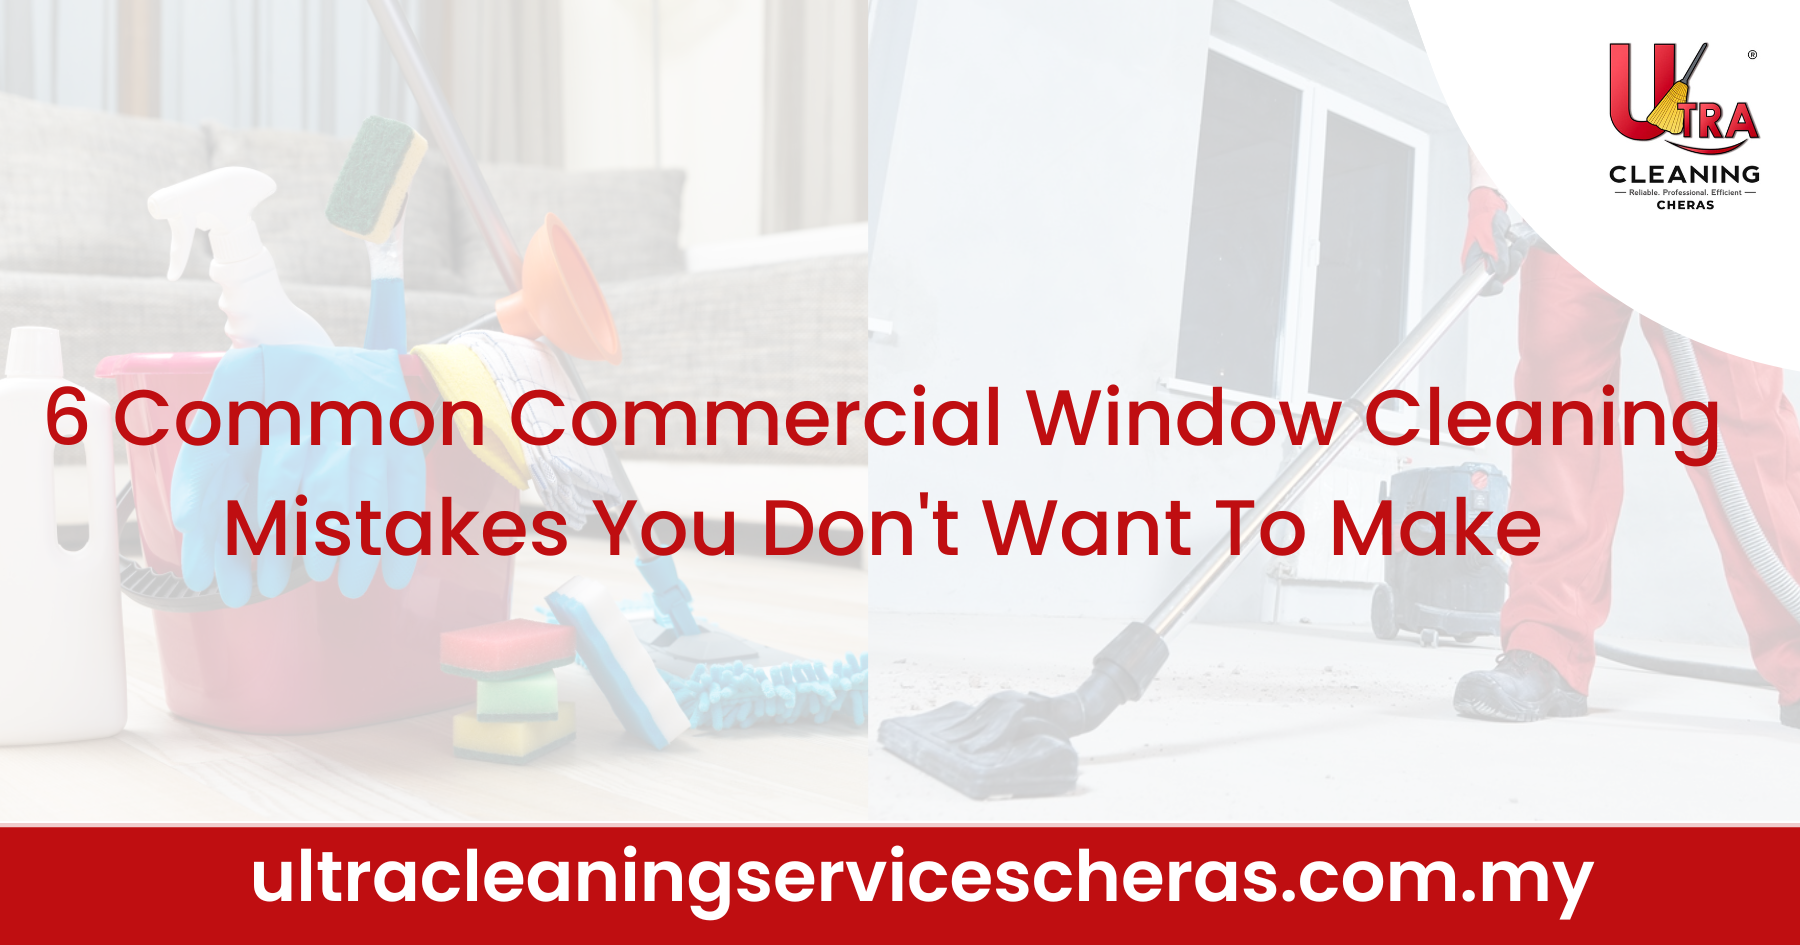 6 Common Commercial Window Cleaning Mistakes You Don't Want To Make